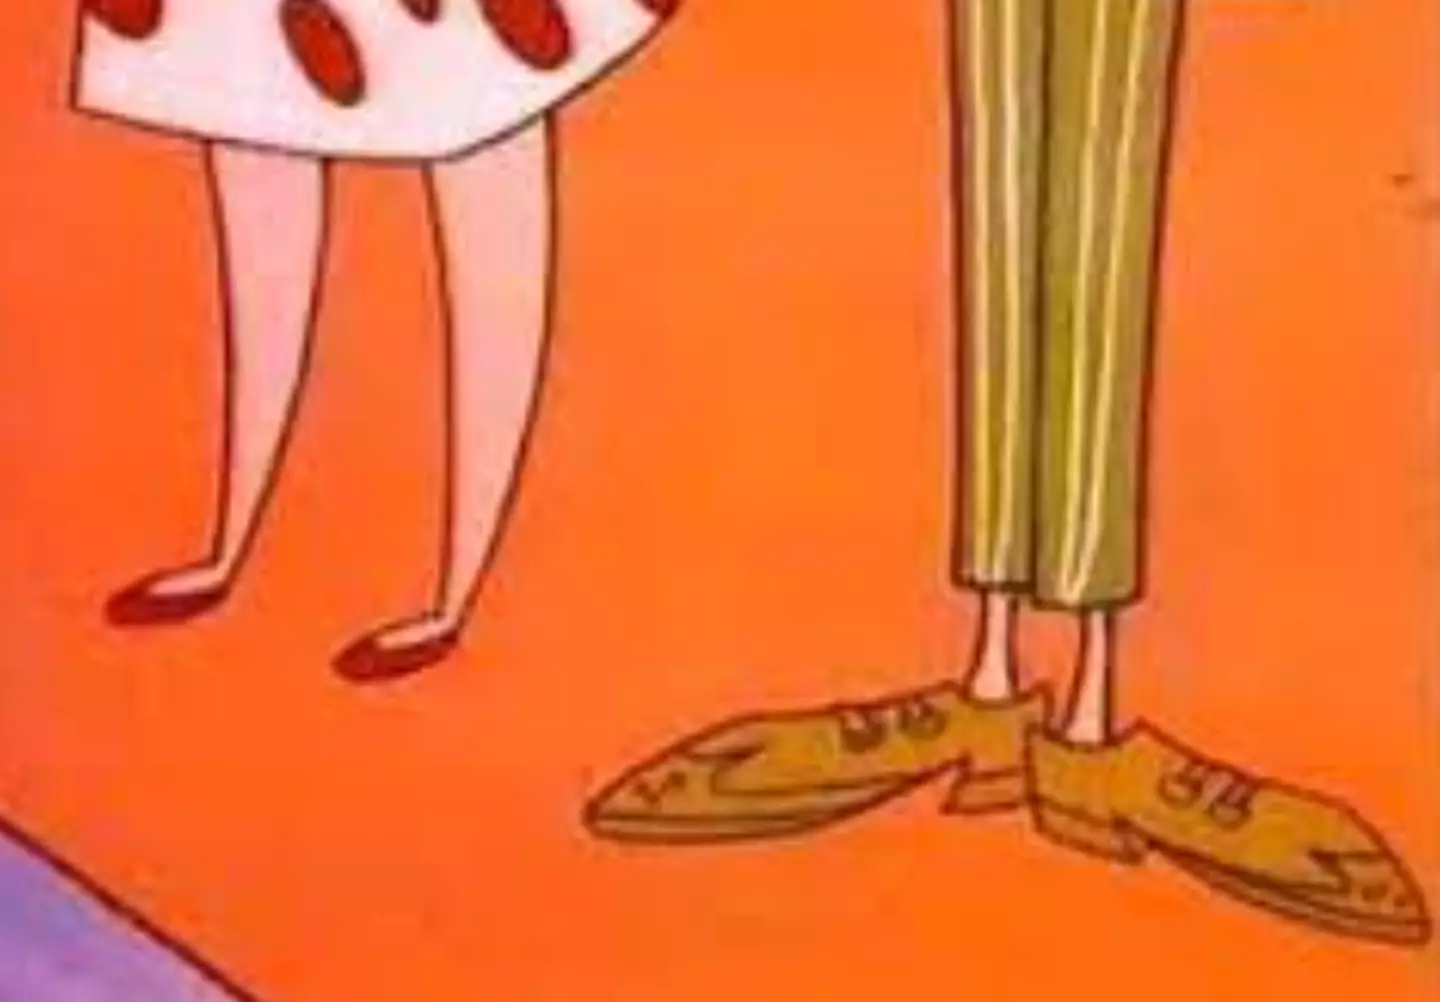 Why were cow and chicken's parents human?